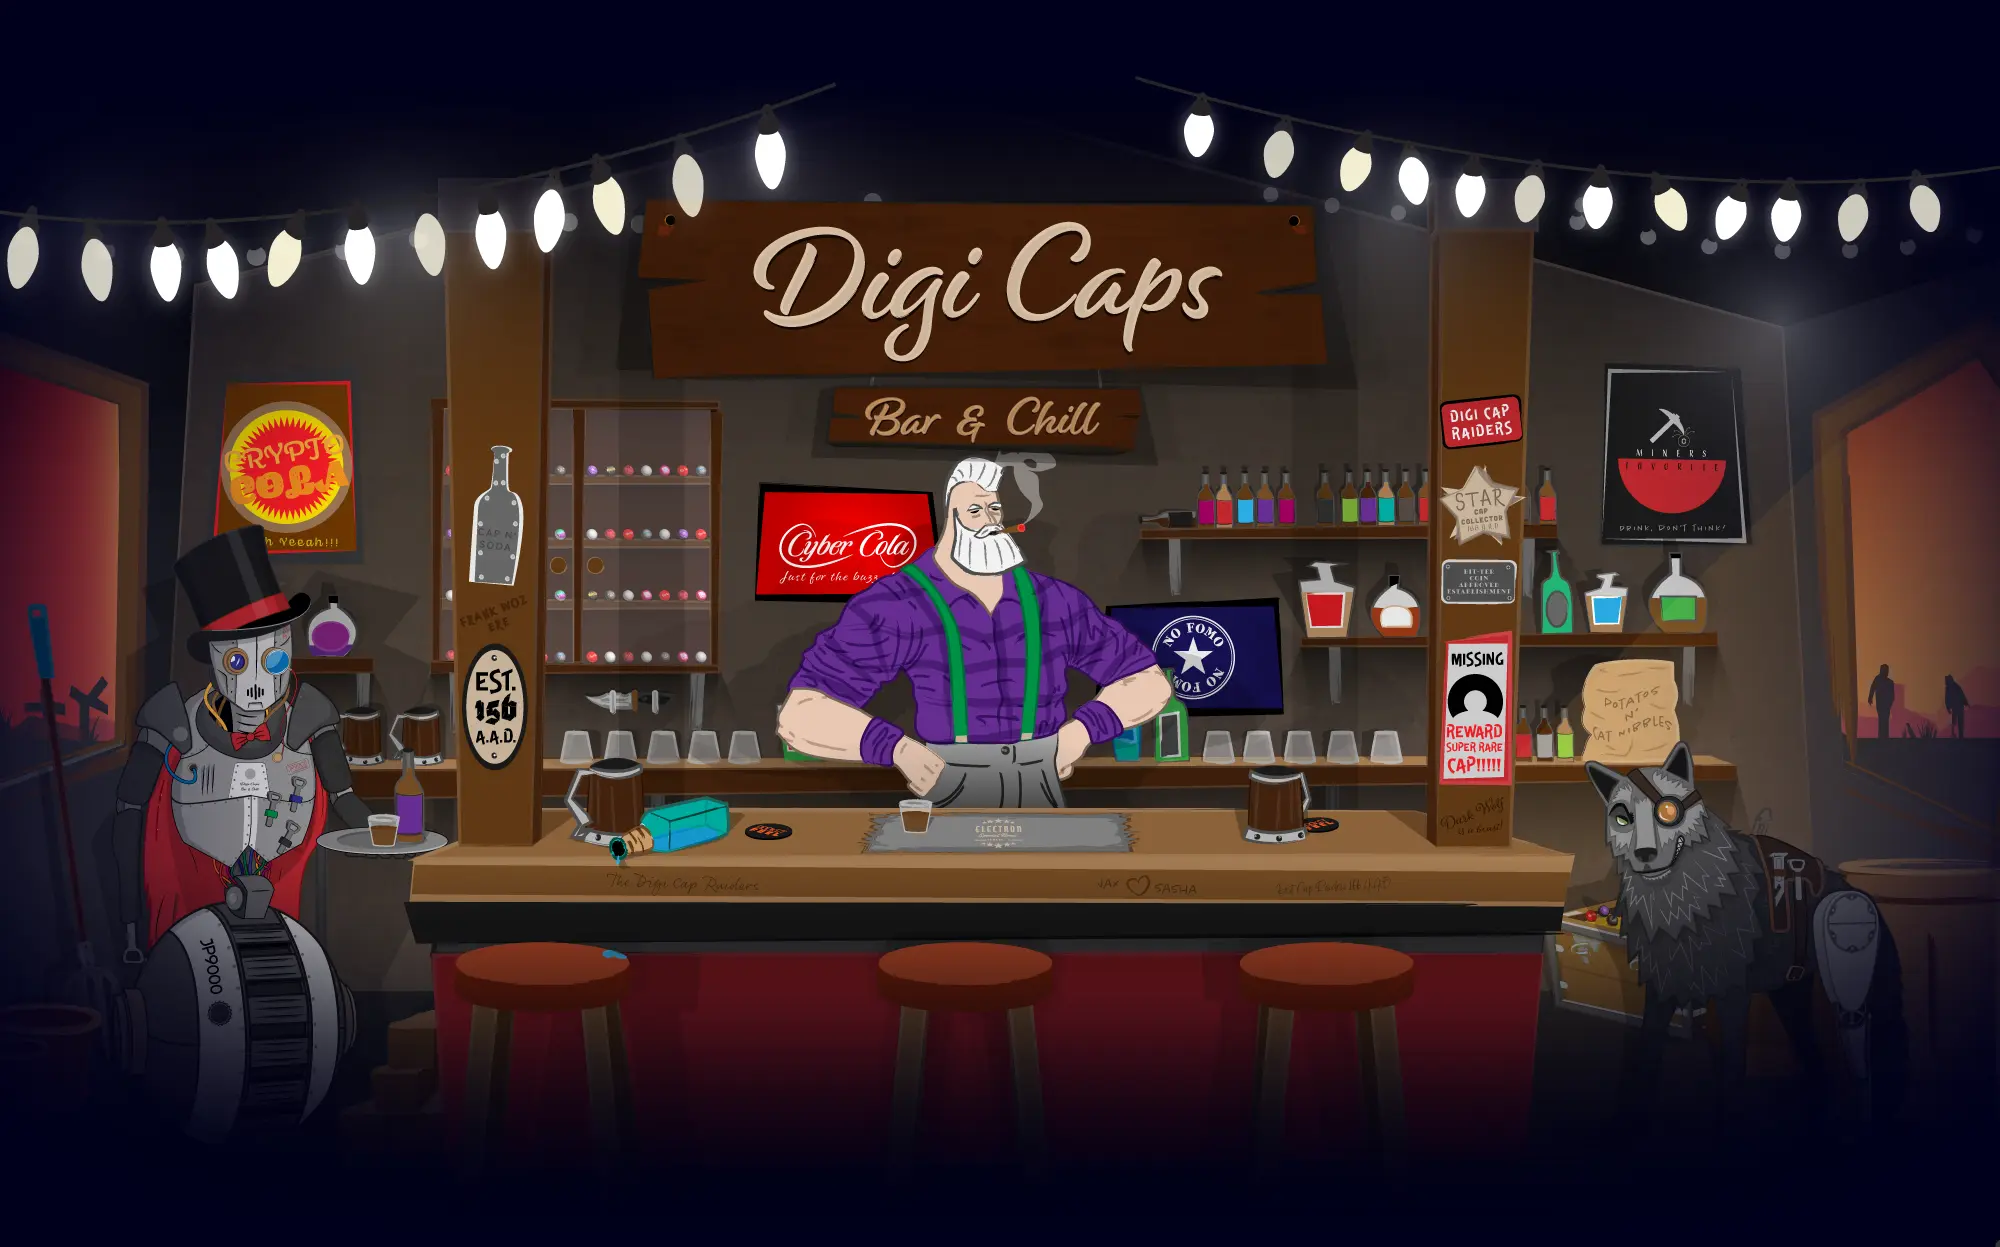 Digi Caps Bar & Chill on OpenSea Banner for home page welcome, thus setting the scene for this NFT Project. Crypto artist Jax Oxide standing in the bar. See below for our nft drops